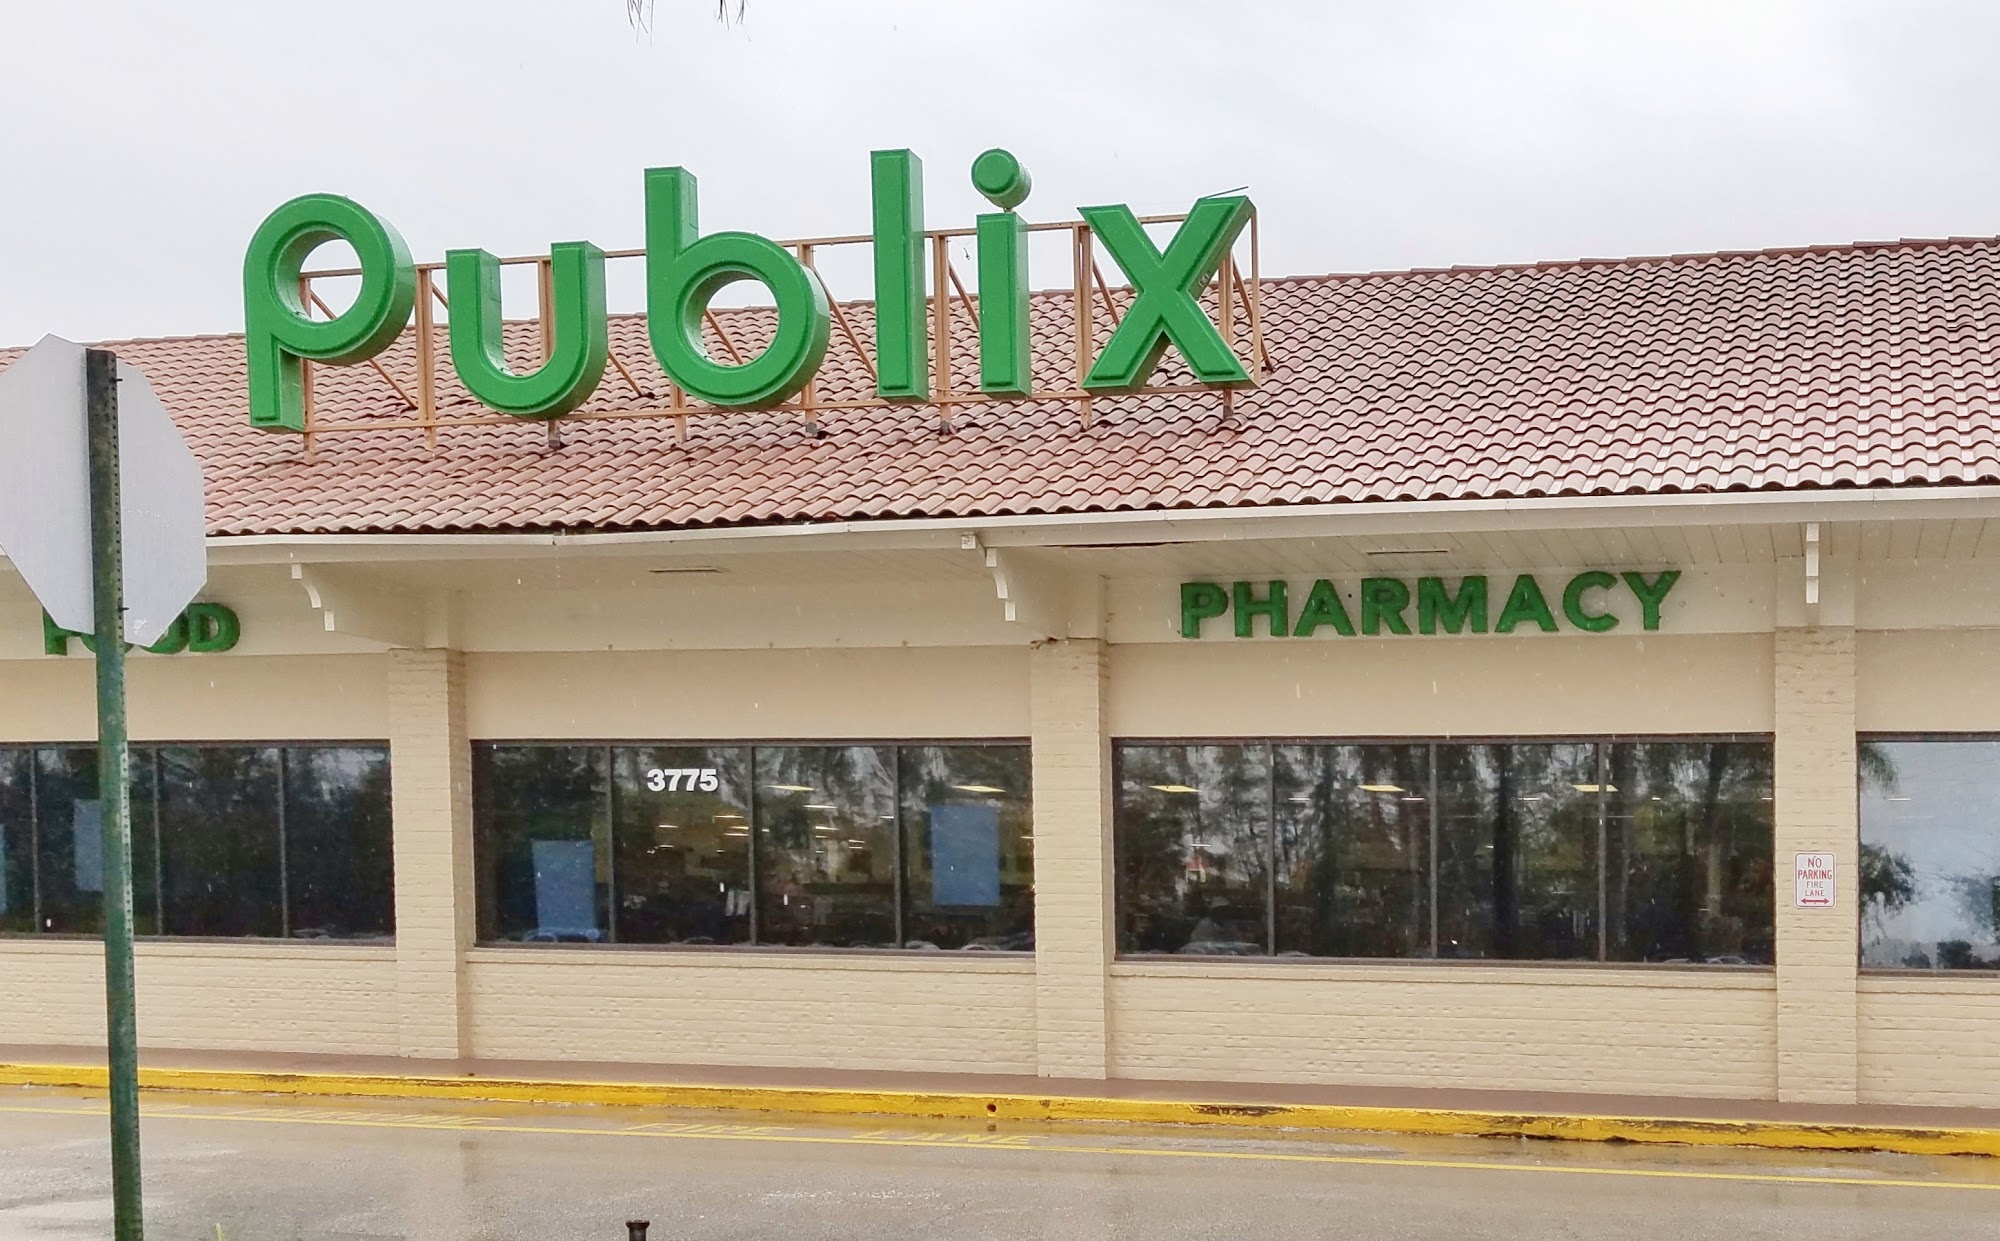 Publix Pharmacy at Shoppes at Village of Golf